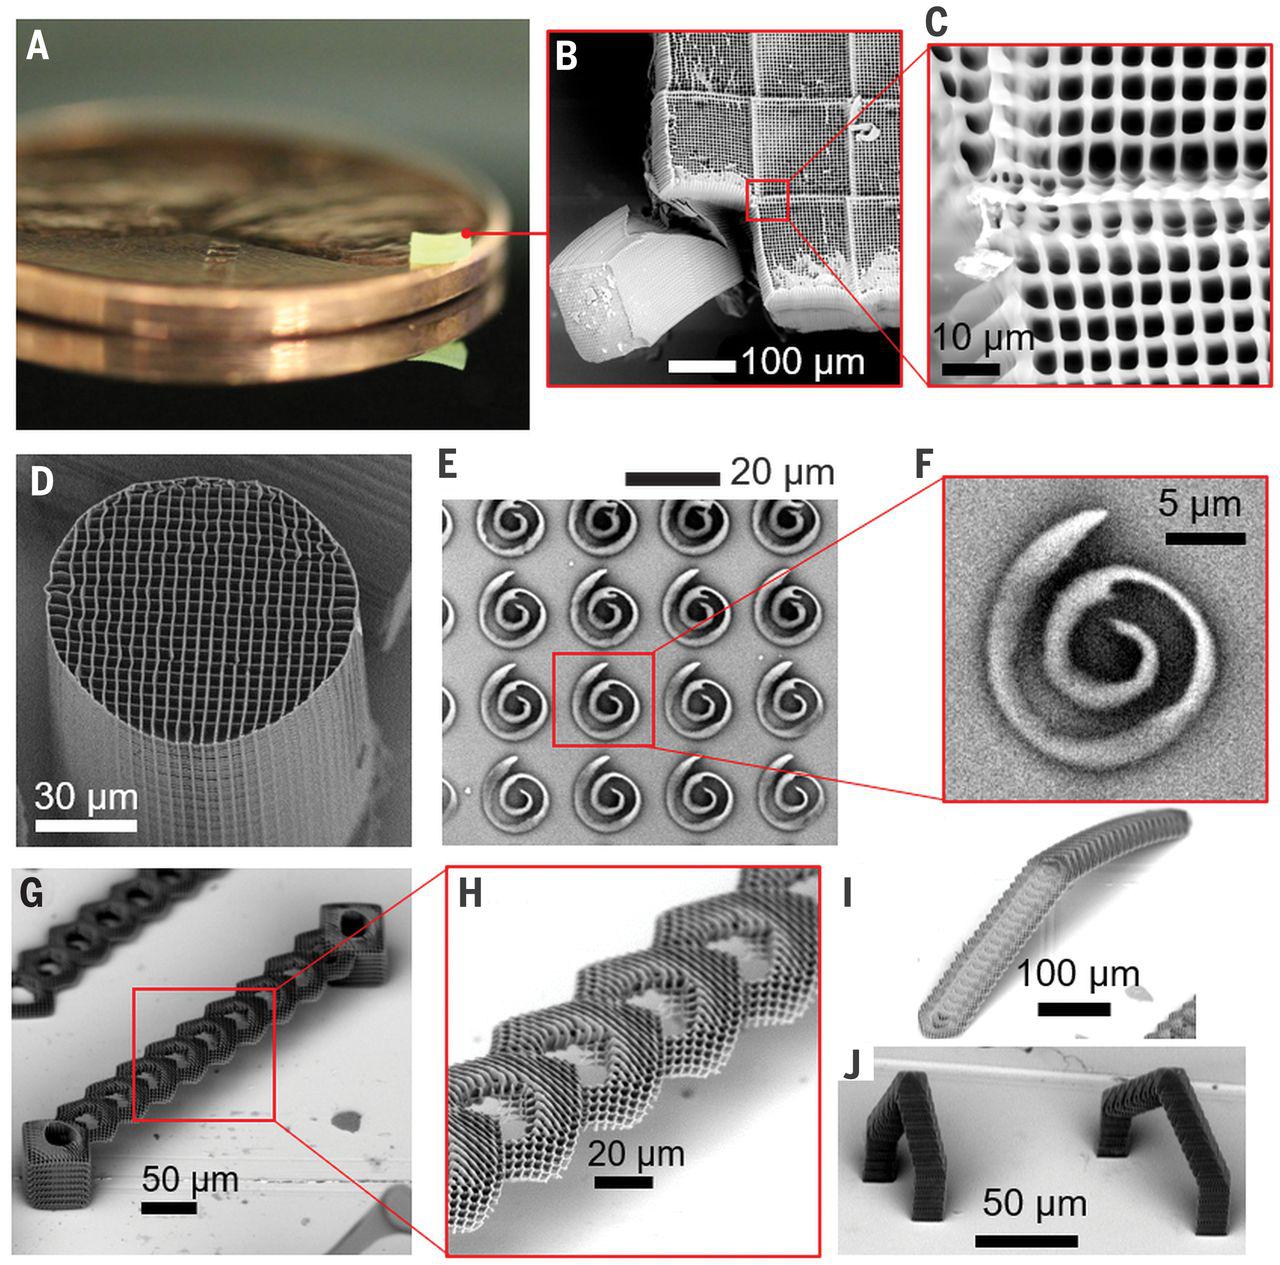 Ultrafast 3-D Nano-structuring of Functional Materials based on Femtosecond Light Sheets 3